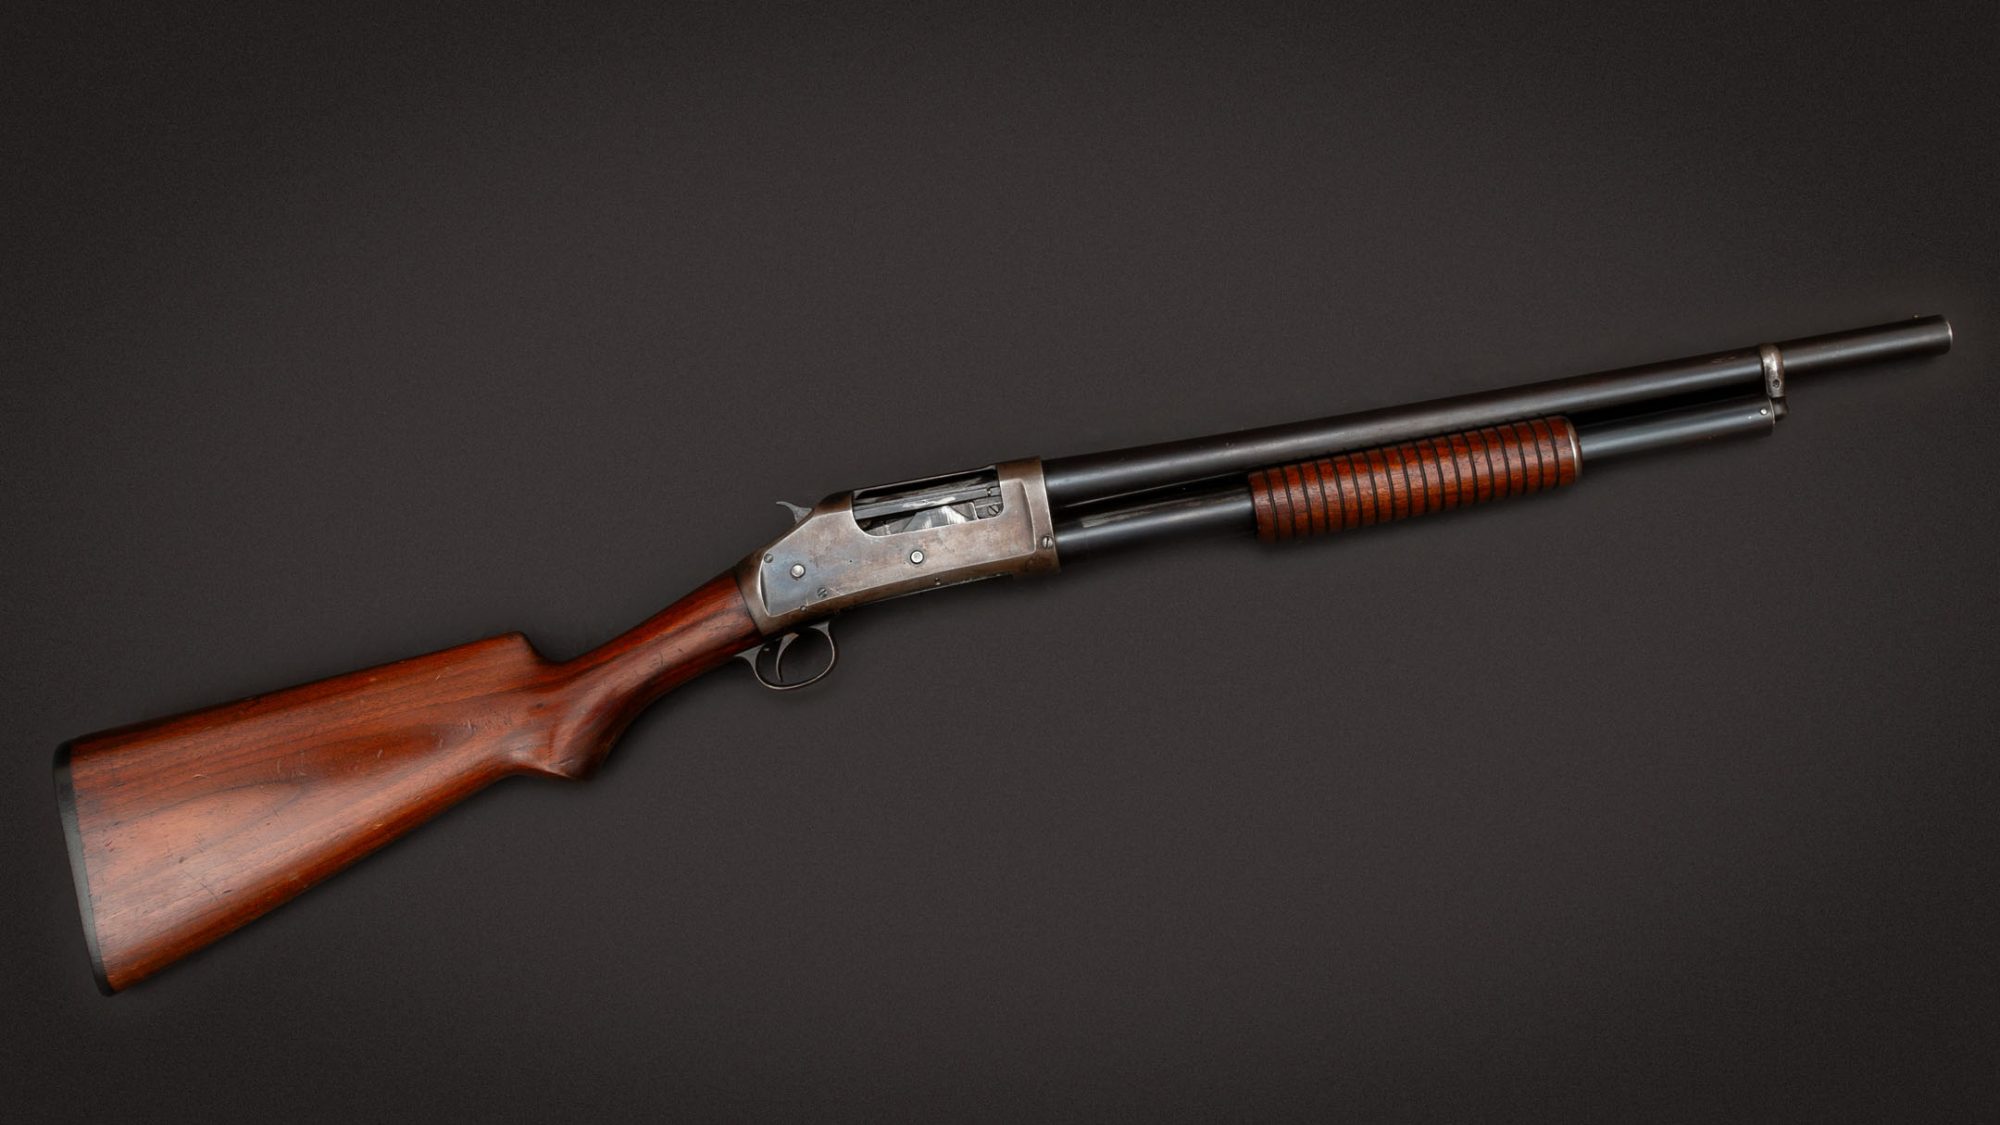 Winchester Model 1897 12 gauge pump action shotgun, for sale by Turnbull Restoration Co. of Bloomfield, NY